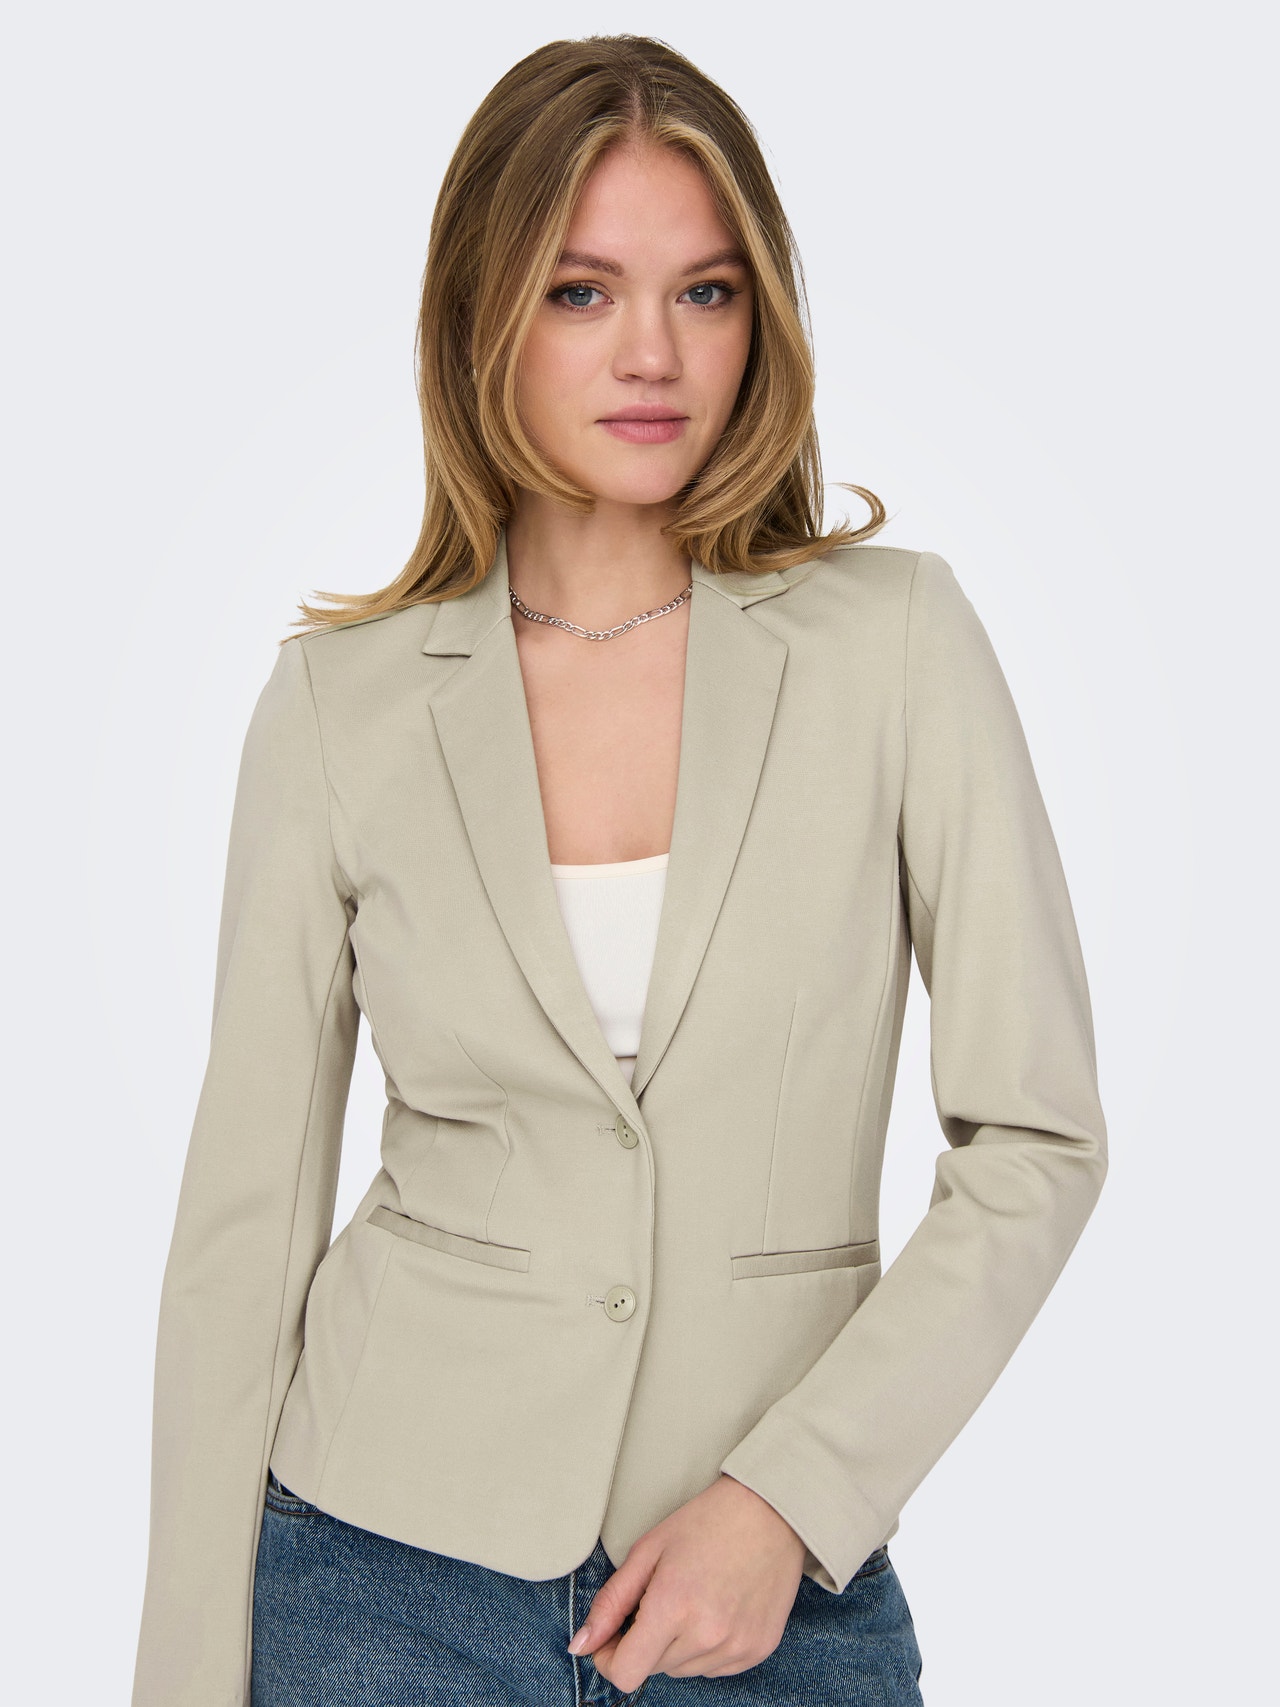 ONLY Blazer with buttons -Pure Cashmere - 15153144